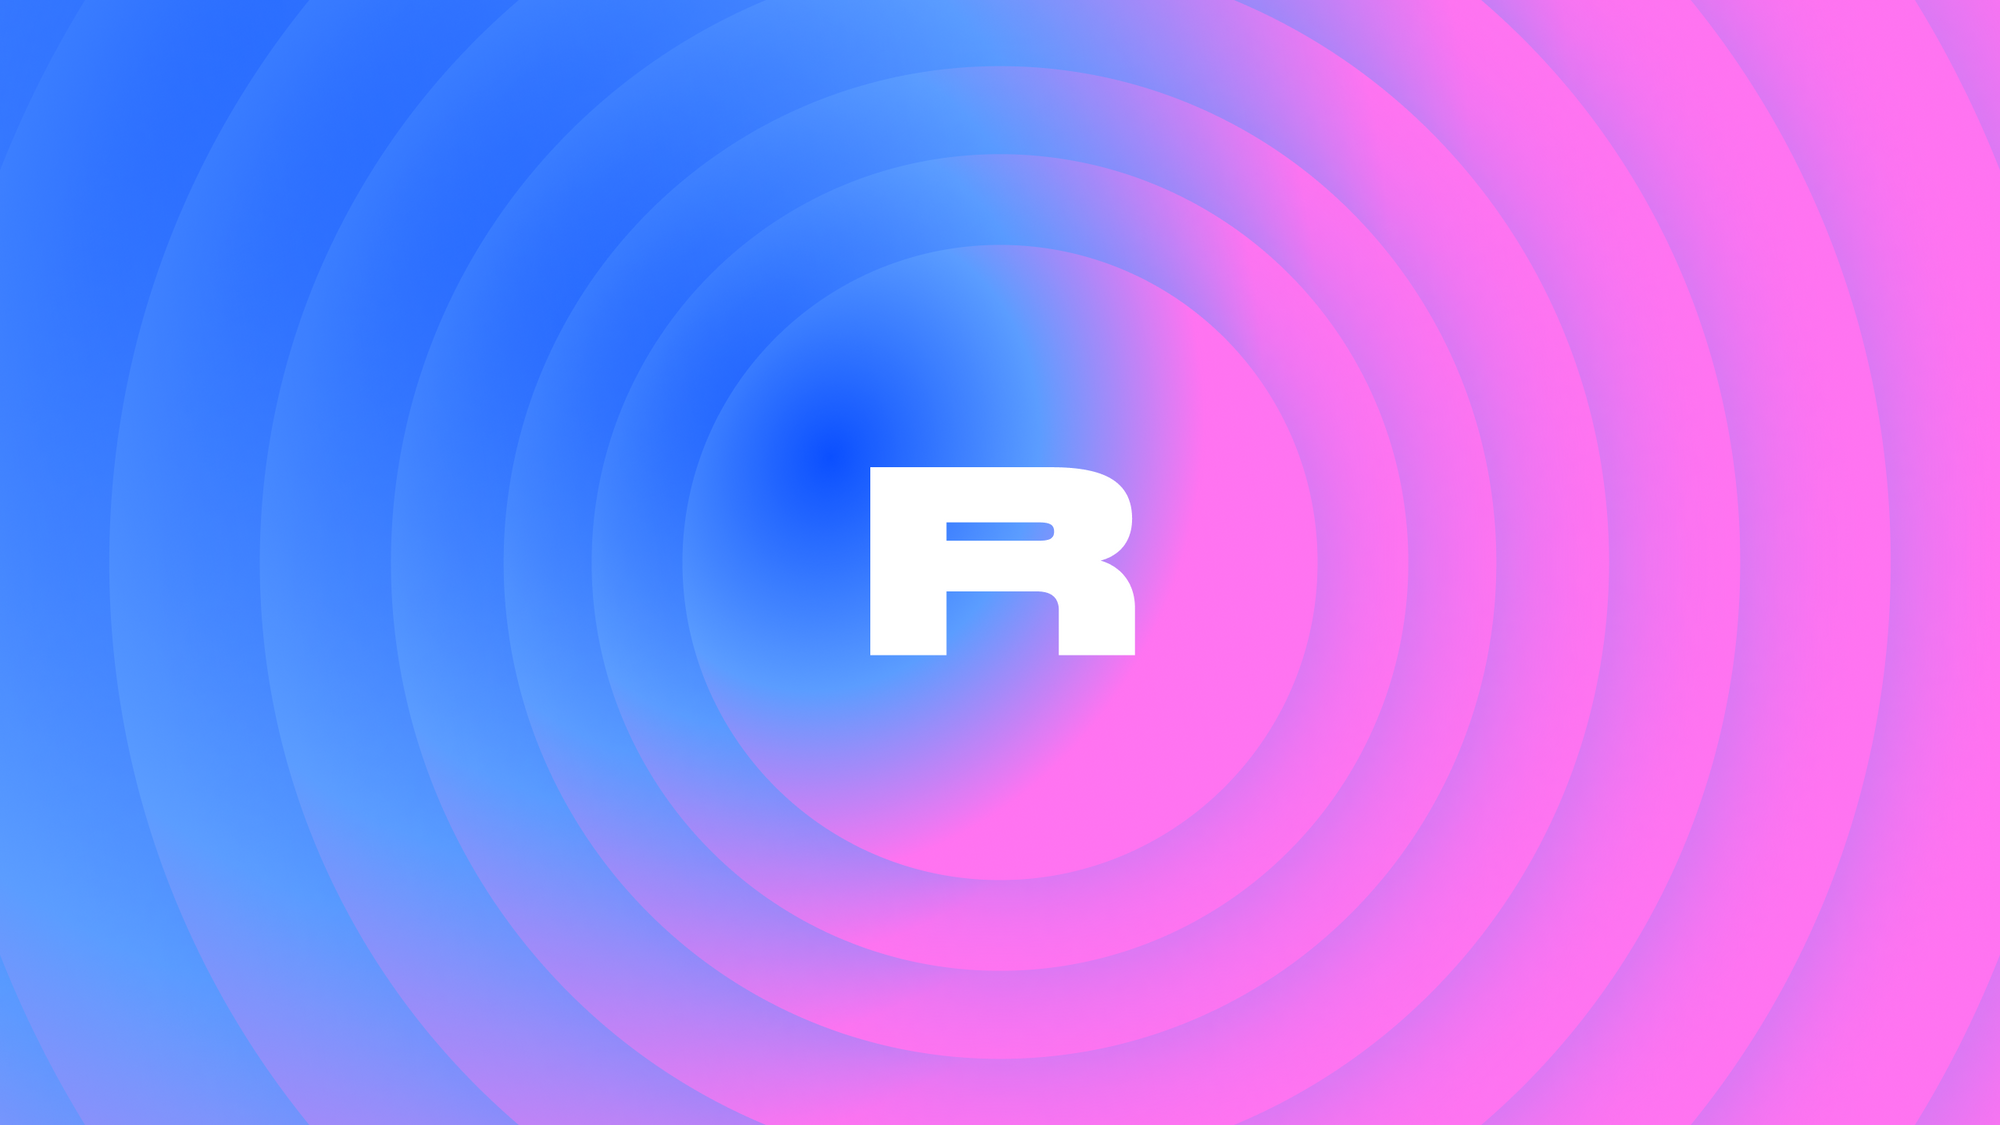 Following the community vote, $RARI weekly distribution for Rarible.com users ends on 16th Jan